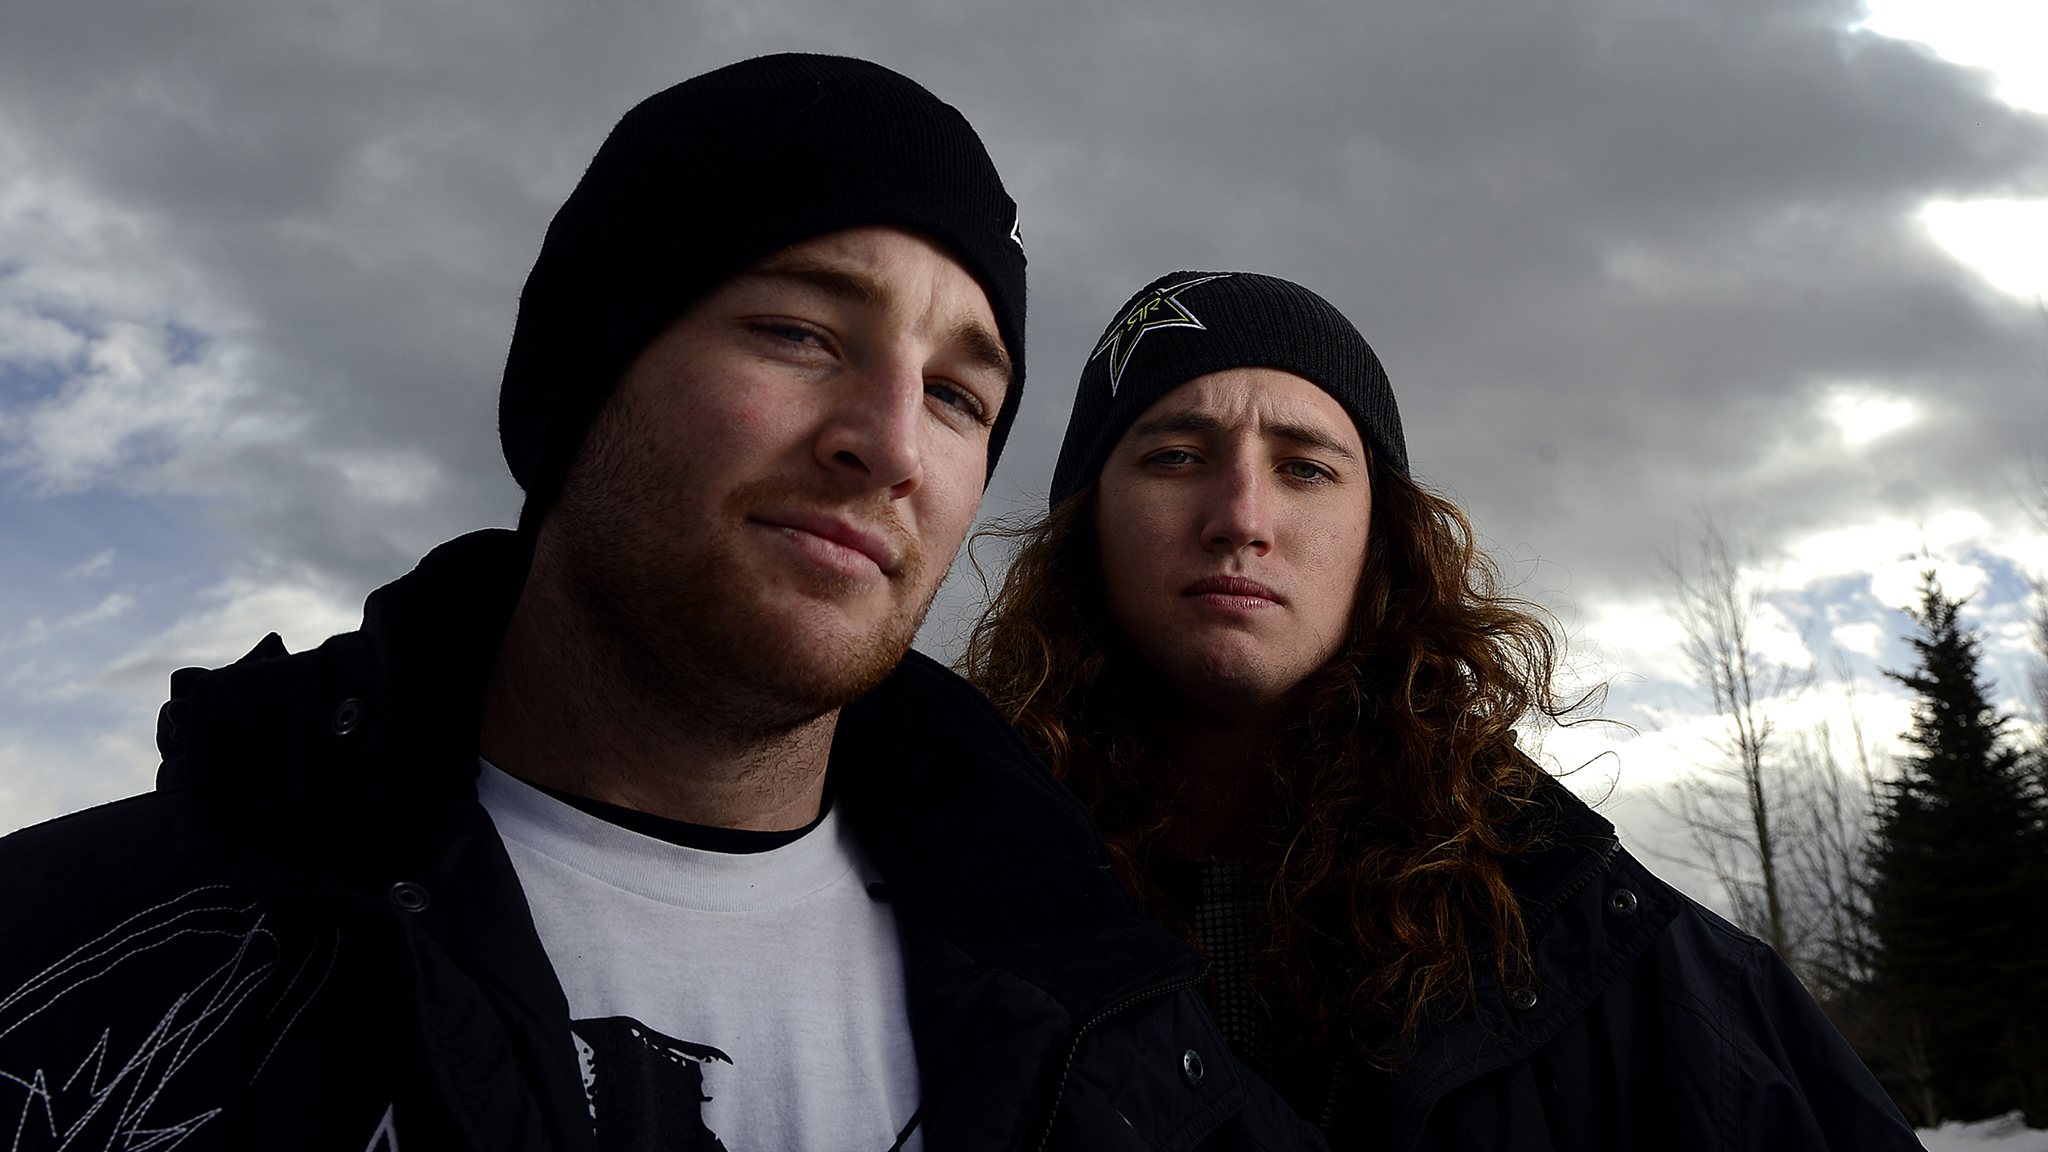 Caleb, left, and Colten Moore, right, prior to the start of X Games Aspen 2013 in January. Younger brother Colten has since returned to freestyle snowmobile riding after the death of Caleb.